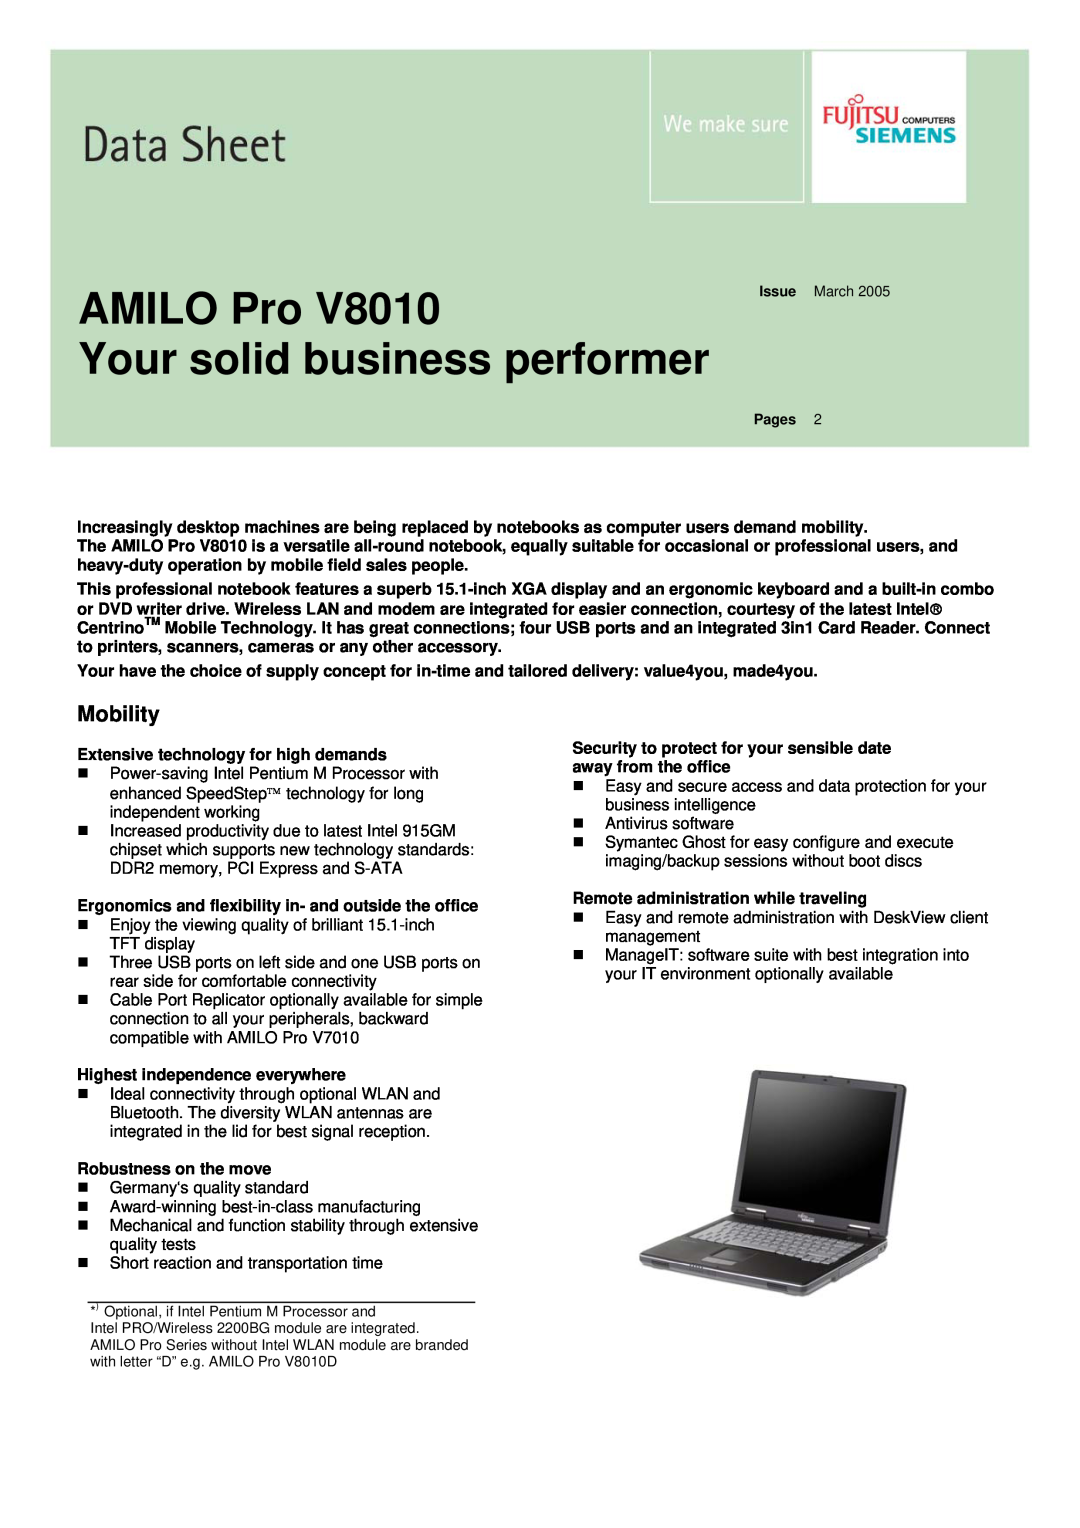 Fujitsu Siemens Computers Pro V8010 manual AMILO Pro Your solid business performer, Mobility 